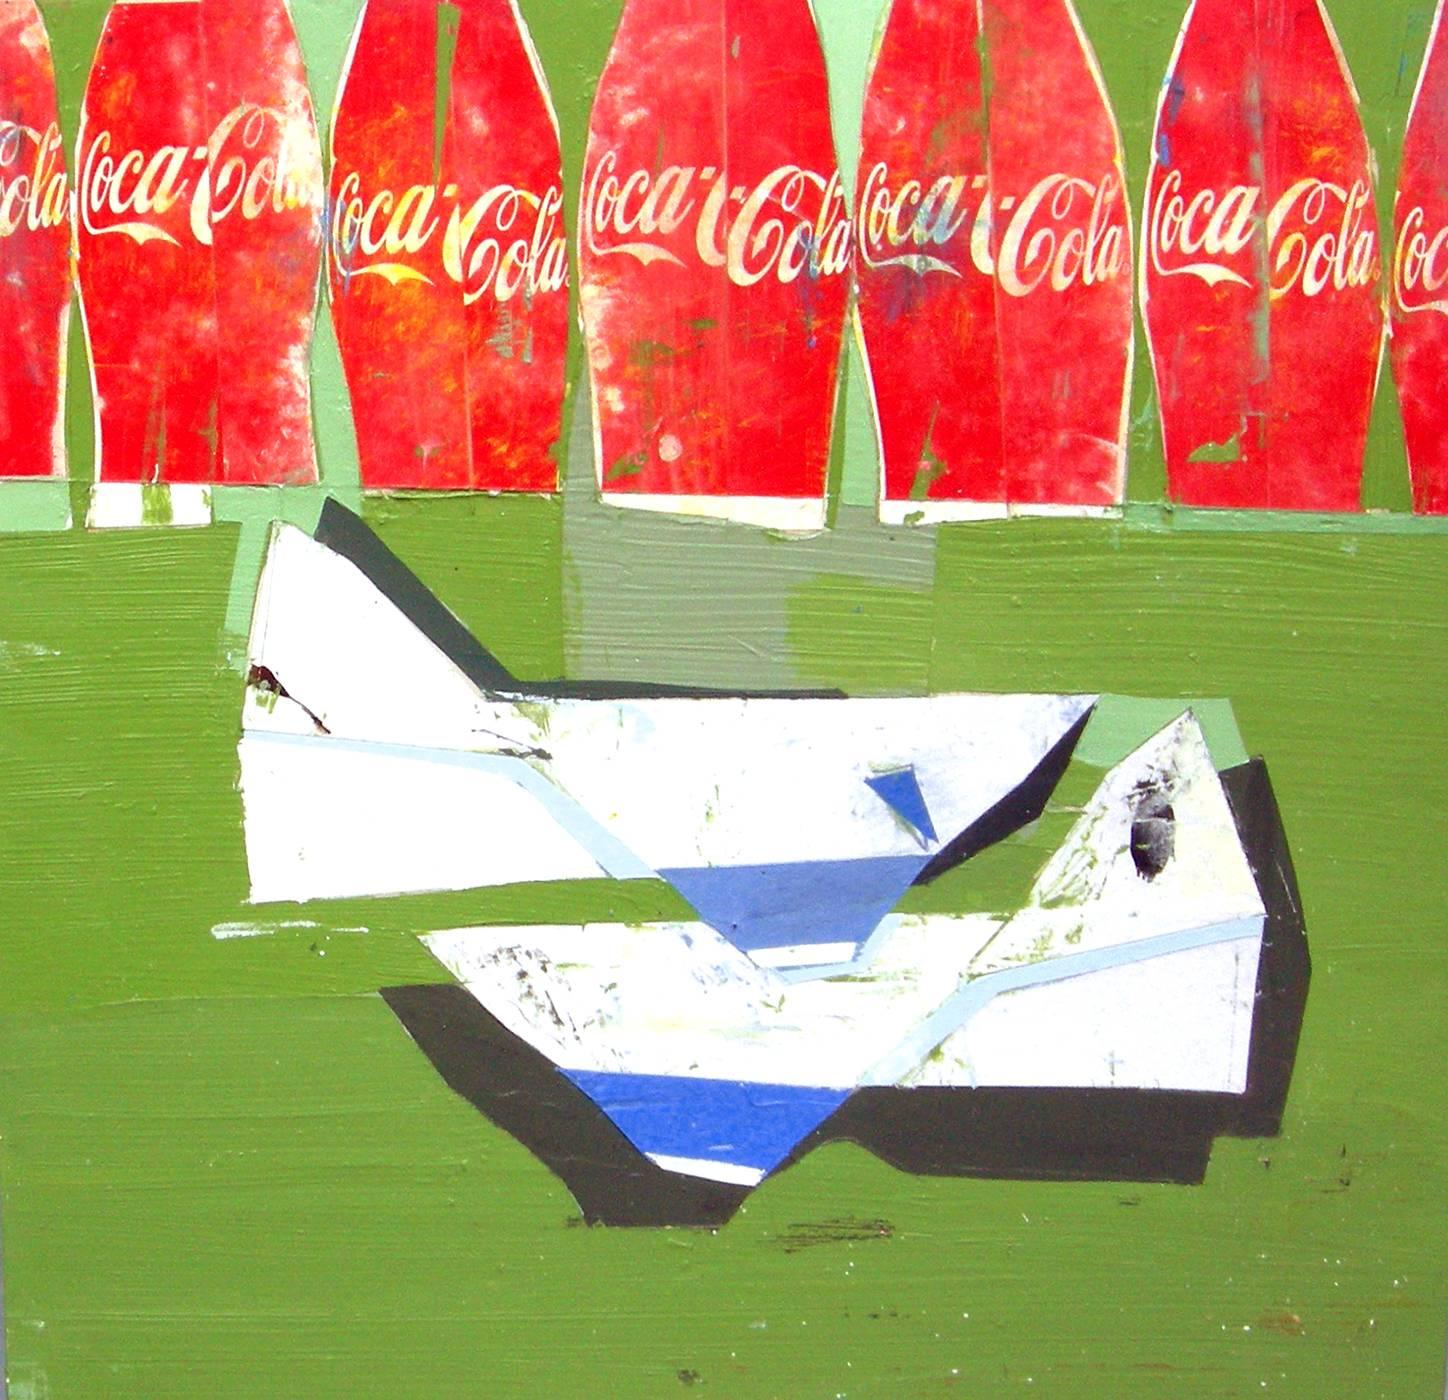 Kim Frohsin Still-Life Painting - When We Were Children / Coke Work - Coca-Cola painting